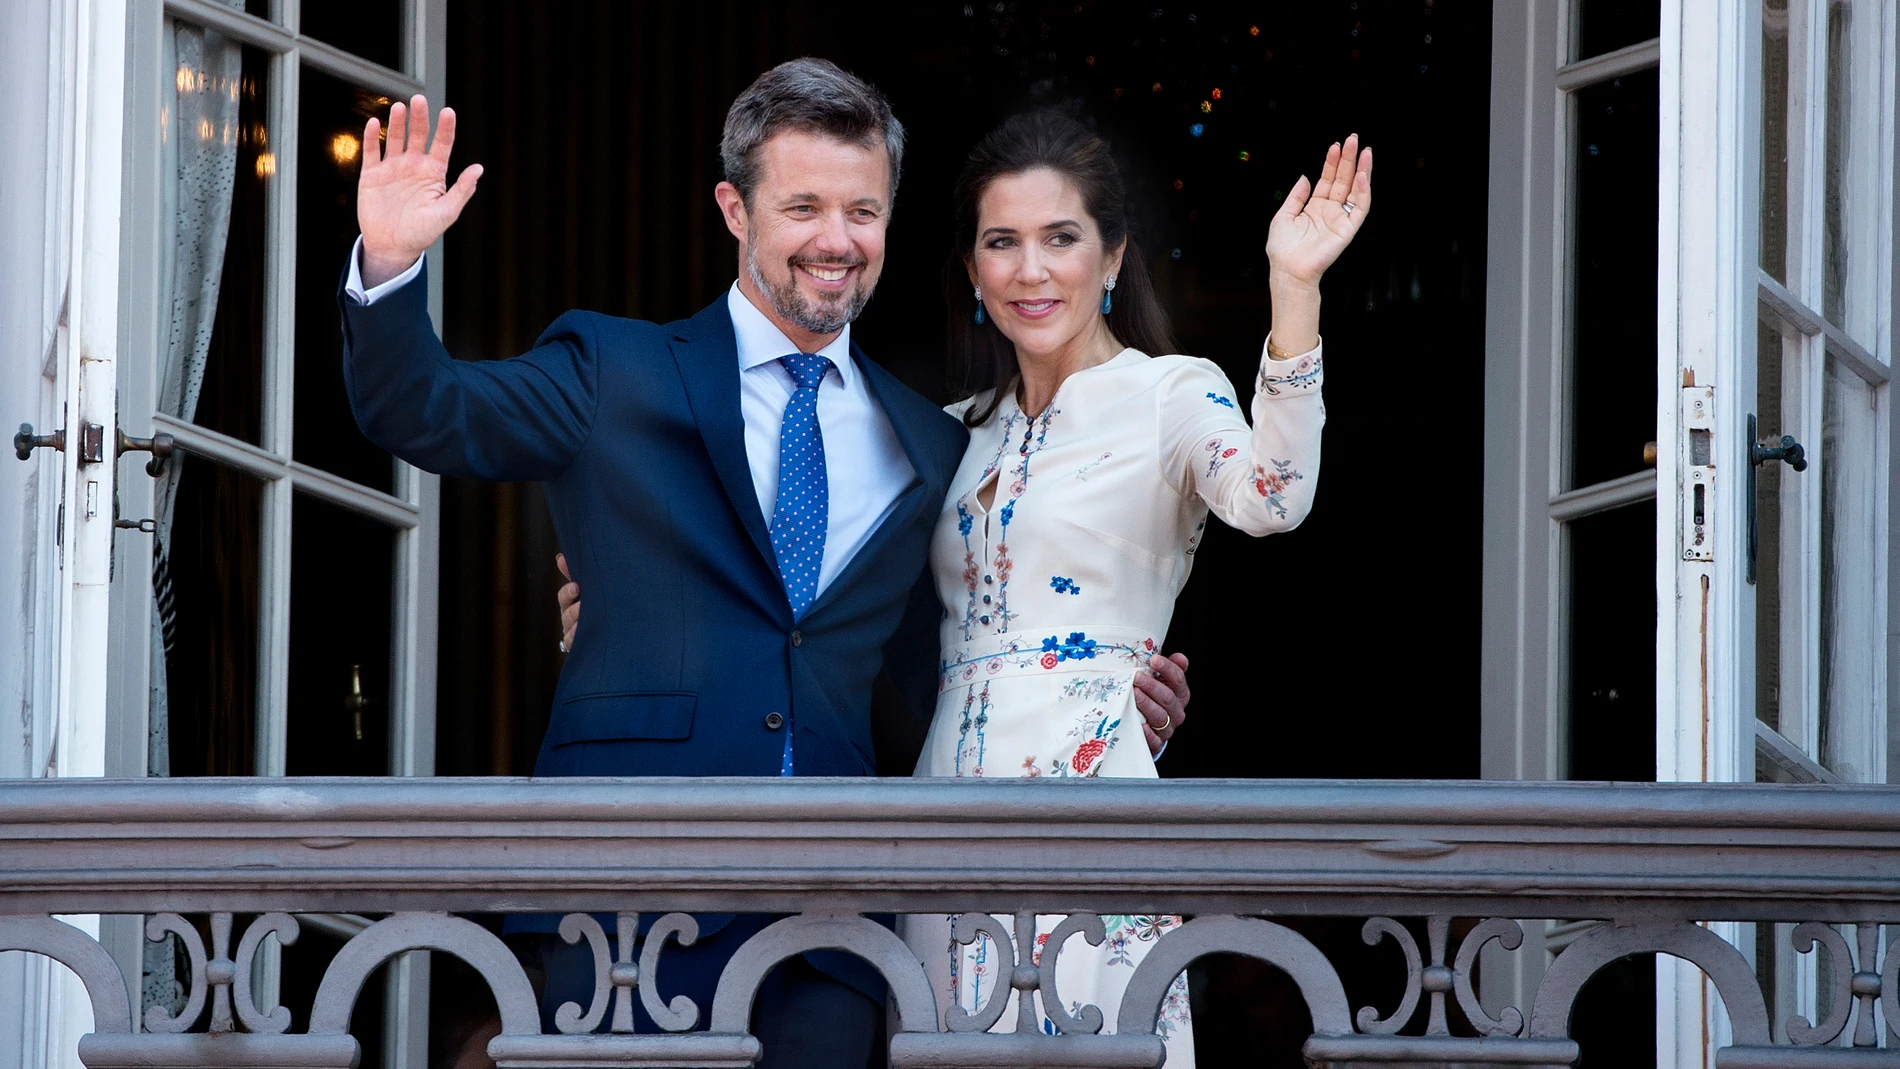 Copenhagen (Denmark), 26/05/2018.- (FILE) - Denmark's Crown Prince Frederik and Crown Princess Mary wave from the balcony of Amalienborg Castle on the Crown Prince's 50th birthday, in Copenhagen, Denmark, 26 May 2018 (reissued 08 January 2024). Denmark's Queen Margrethe II announced in her New Year's speech on 31 December 2023 that she would abdicate on 14 January 2024, the 52nd anniversary of her accession to the throne. Her eldest son, Crown Prince Frederik, is set to succeed his mother on ...